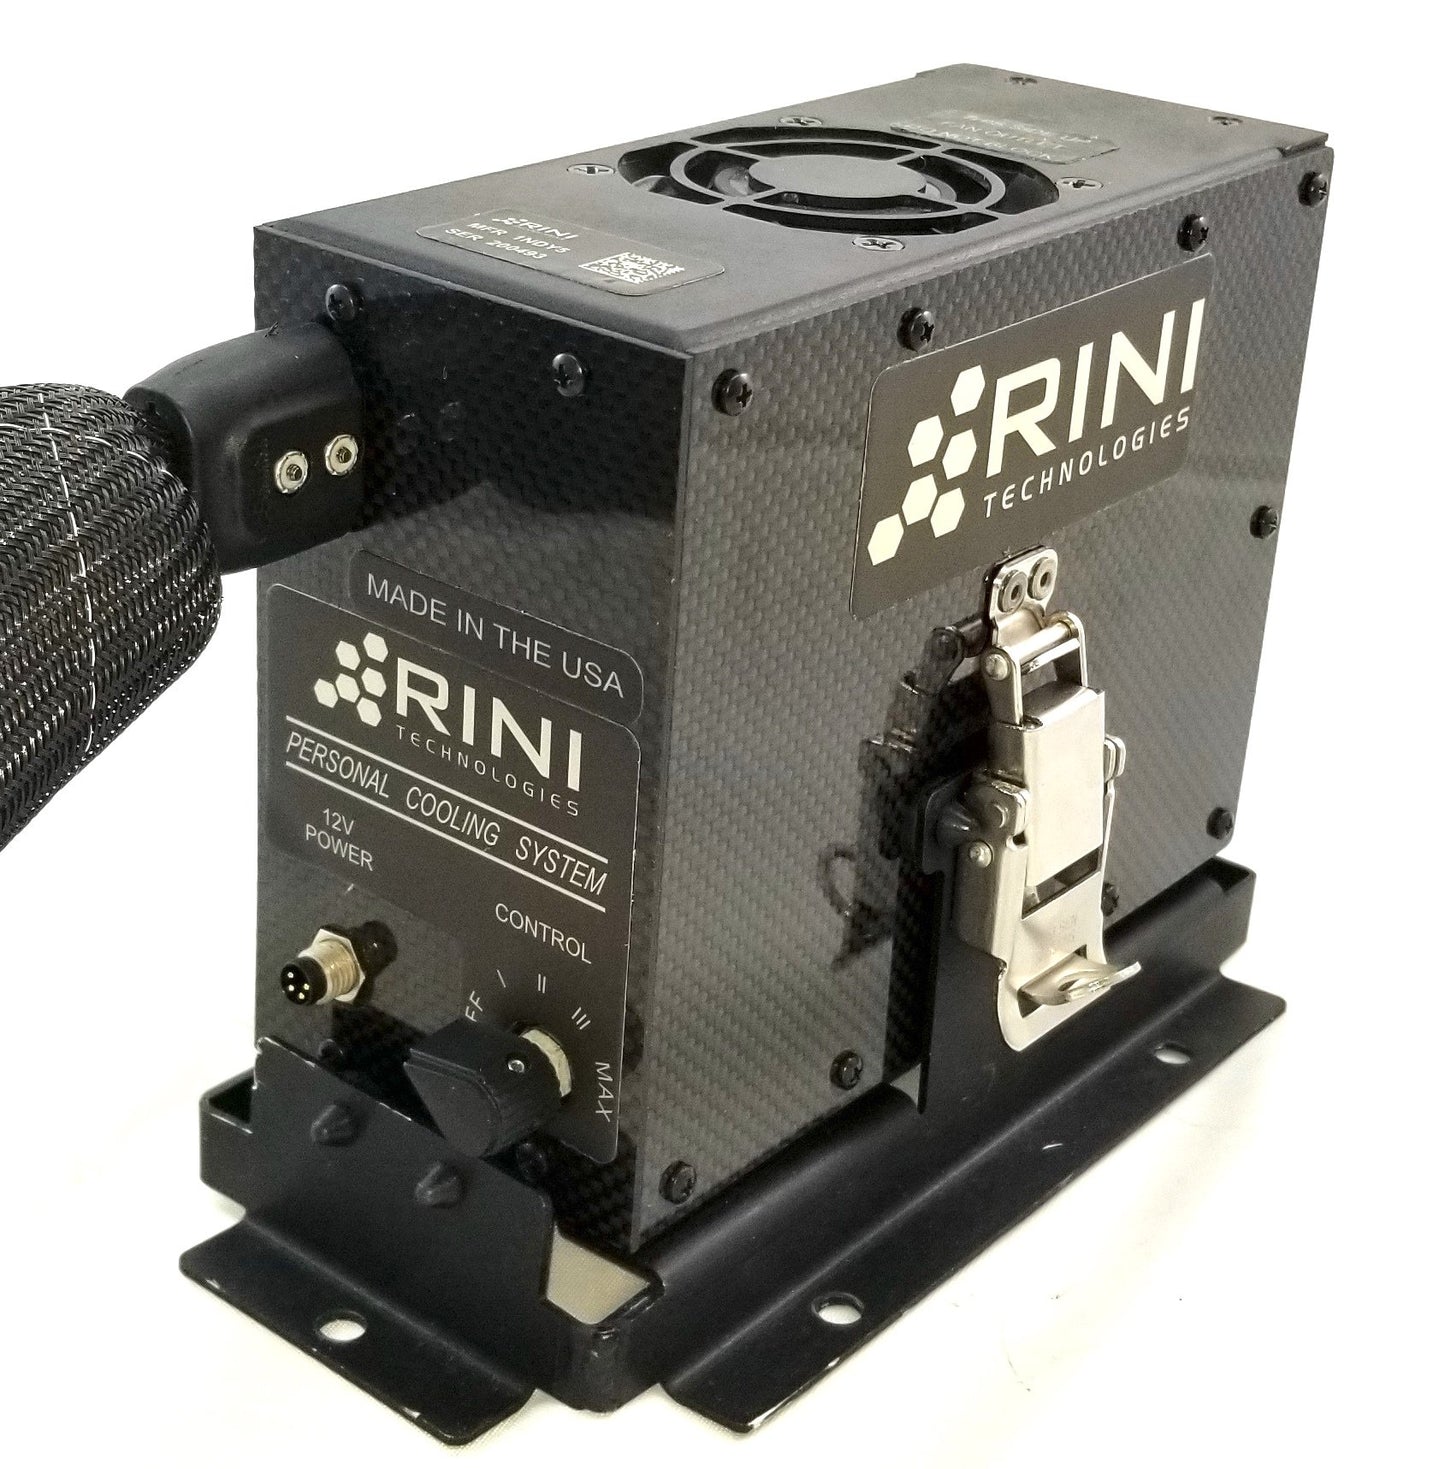 Fast Cooling -  RINI Personal Cooling System